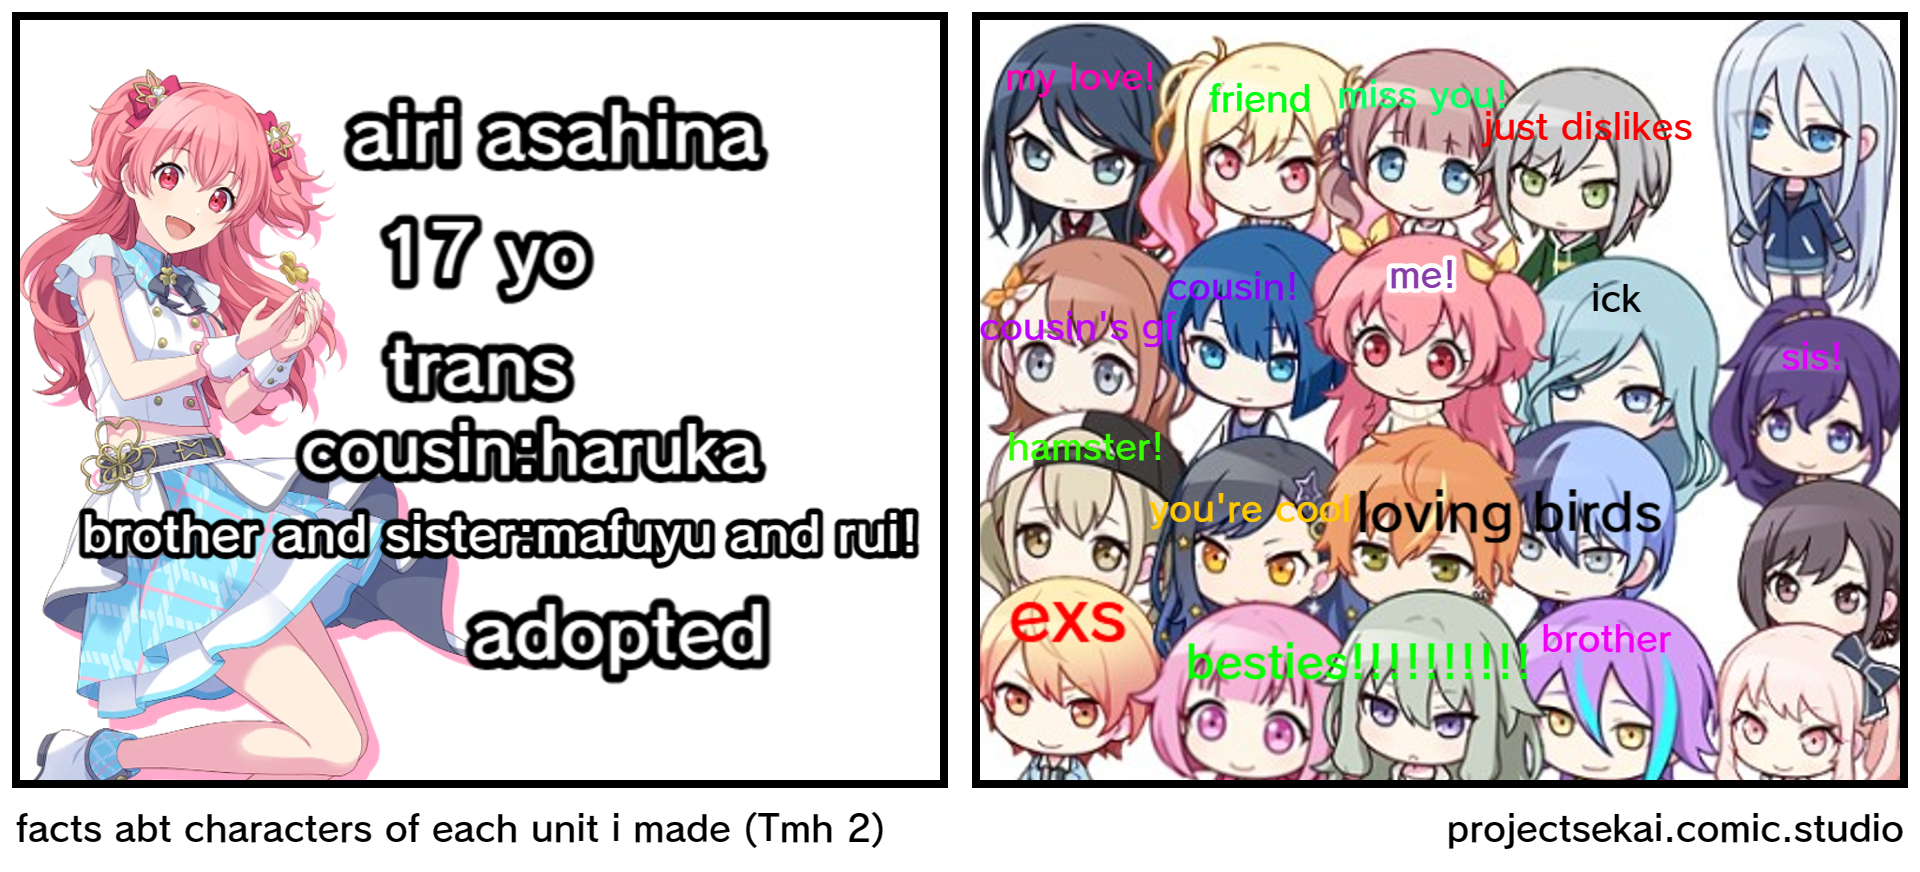 facts abt characters of each unit i made (Tmh 2)